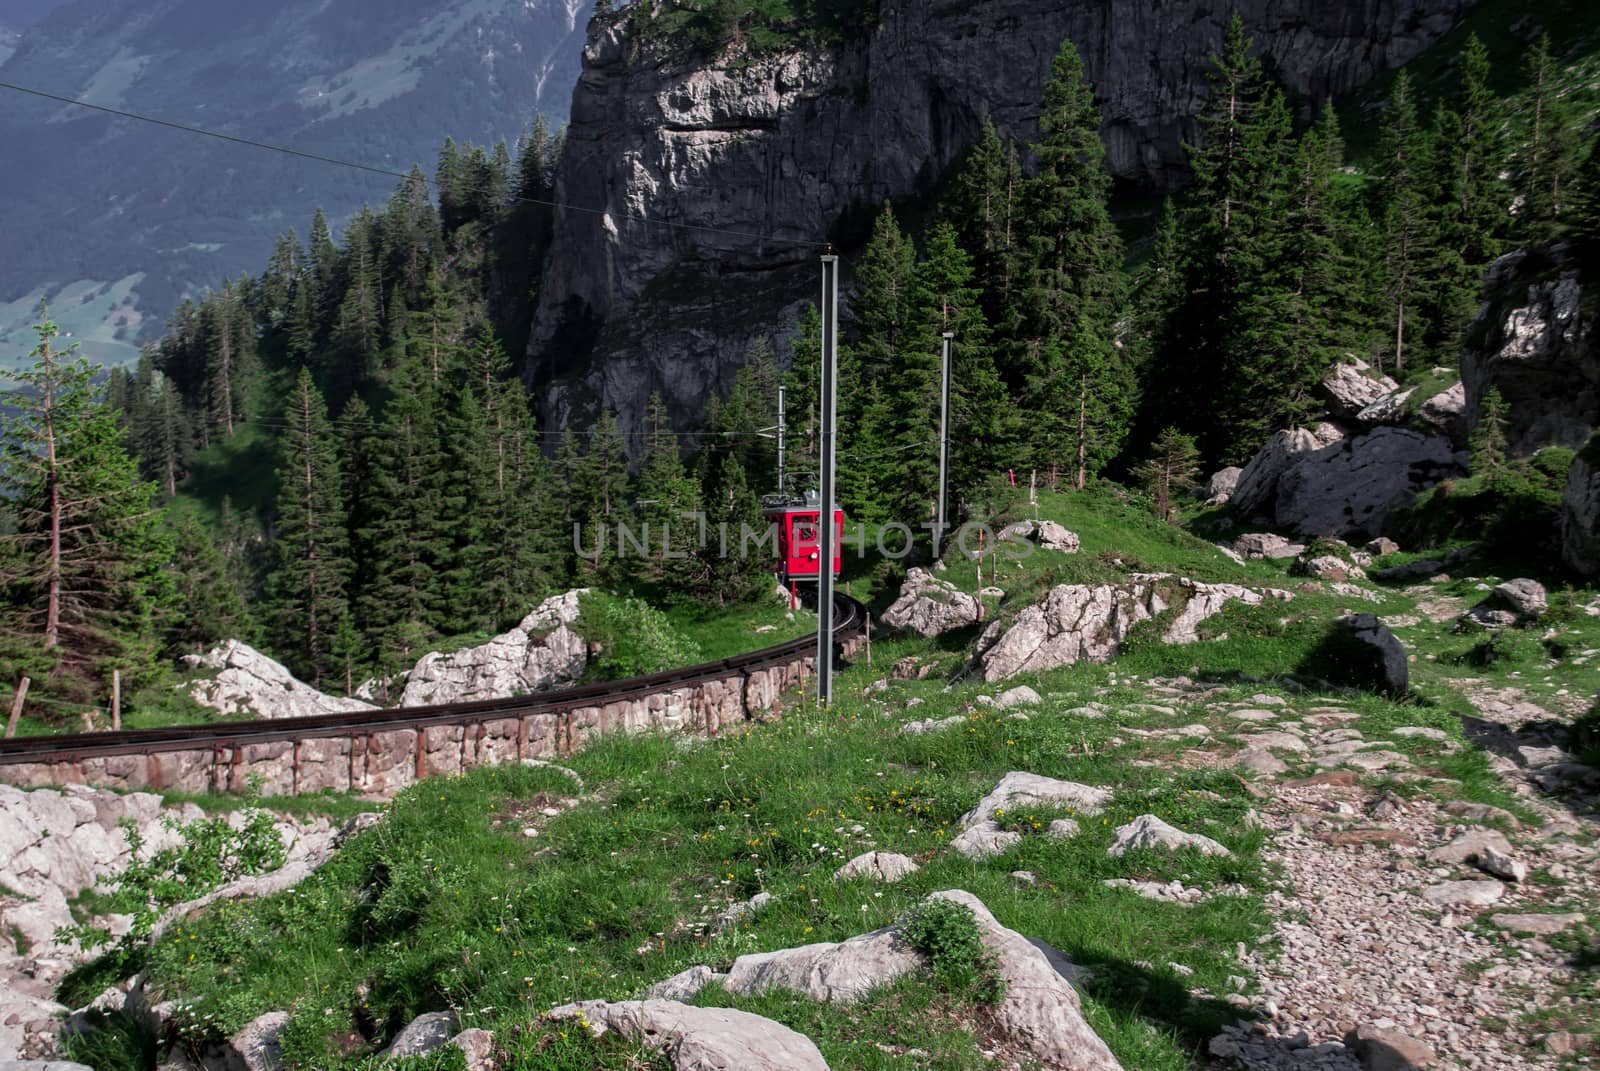 Railway up the momuntain by arvidnorberg